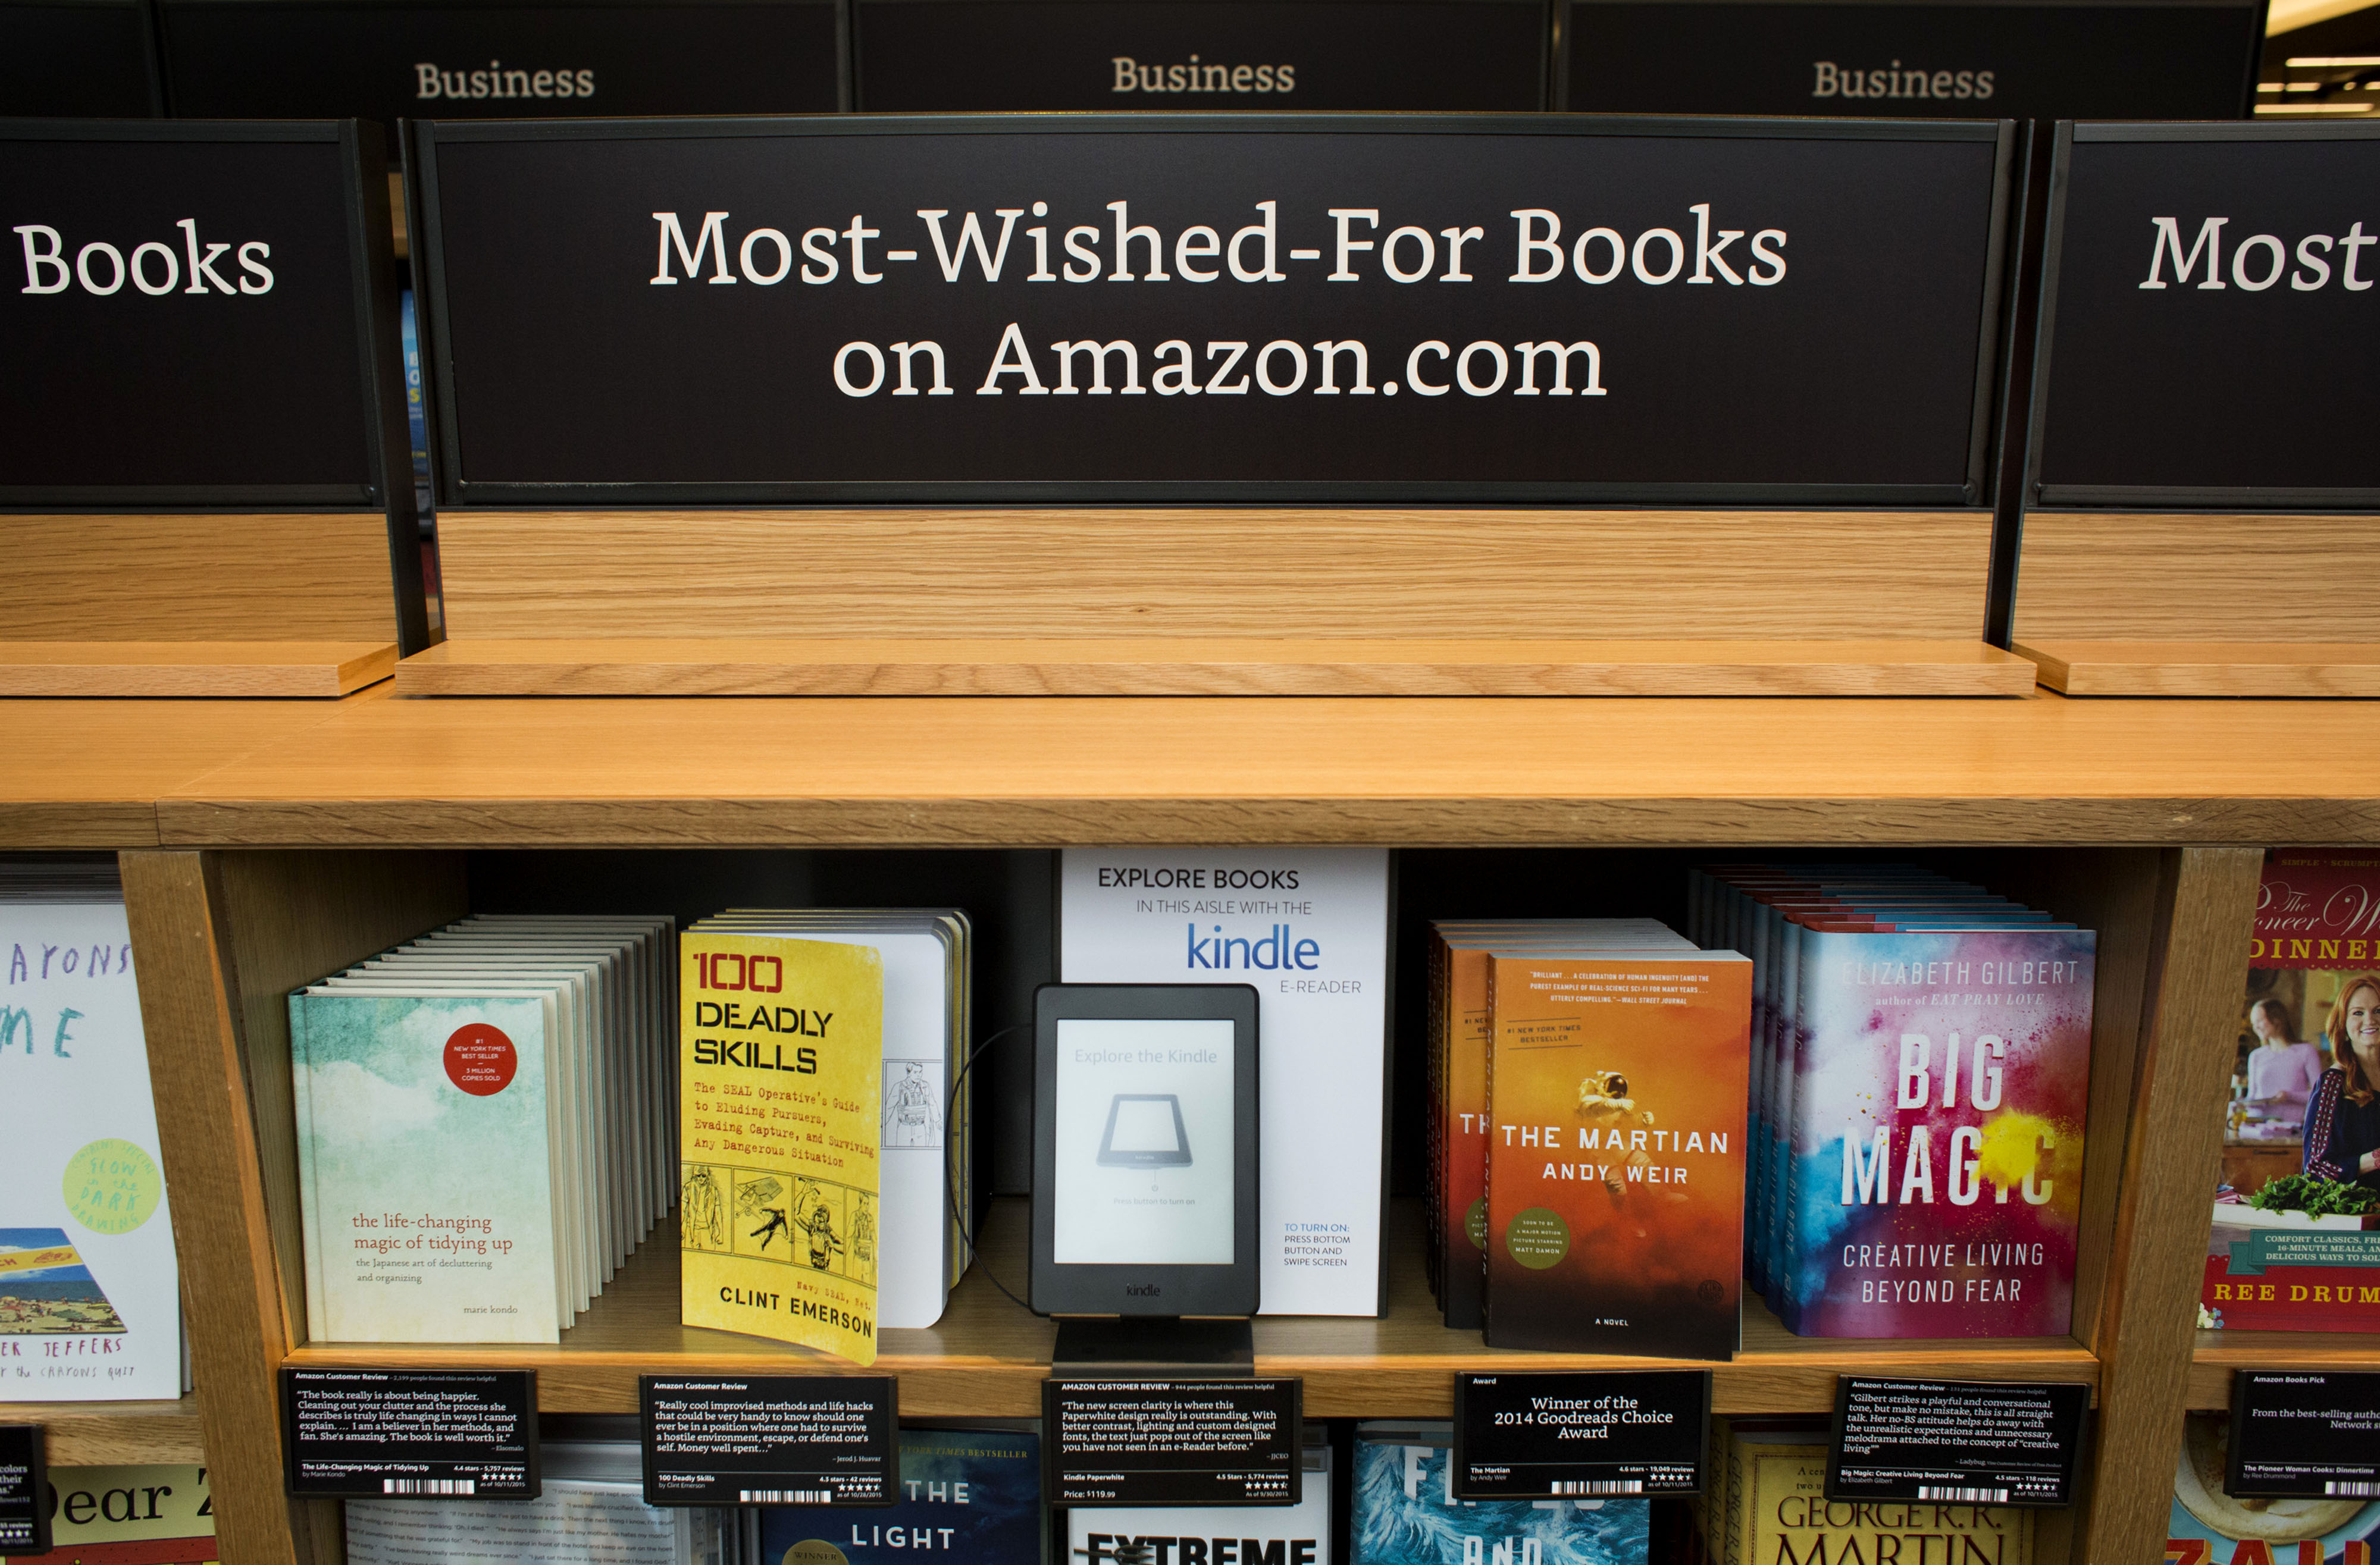 Books are display for sale at the Amazon Books store in Seattle, Washington, U.S., on Tuesday, Nov. 3, 2015. Amazon.com Inc.'s store lets shoppers pick up books and try the online retailer's gadgets, including the Fire TV streaming device, Fire tablet and Kindle electronic reader. Photographer: David Ryder/Bloomberg via Getty Images (Bloomberg—Bloomberg via Getty Images)